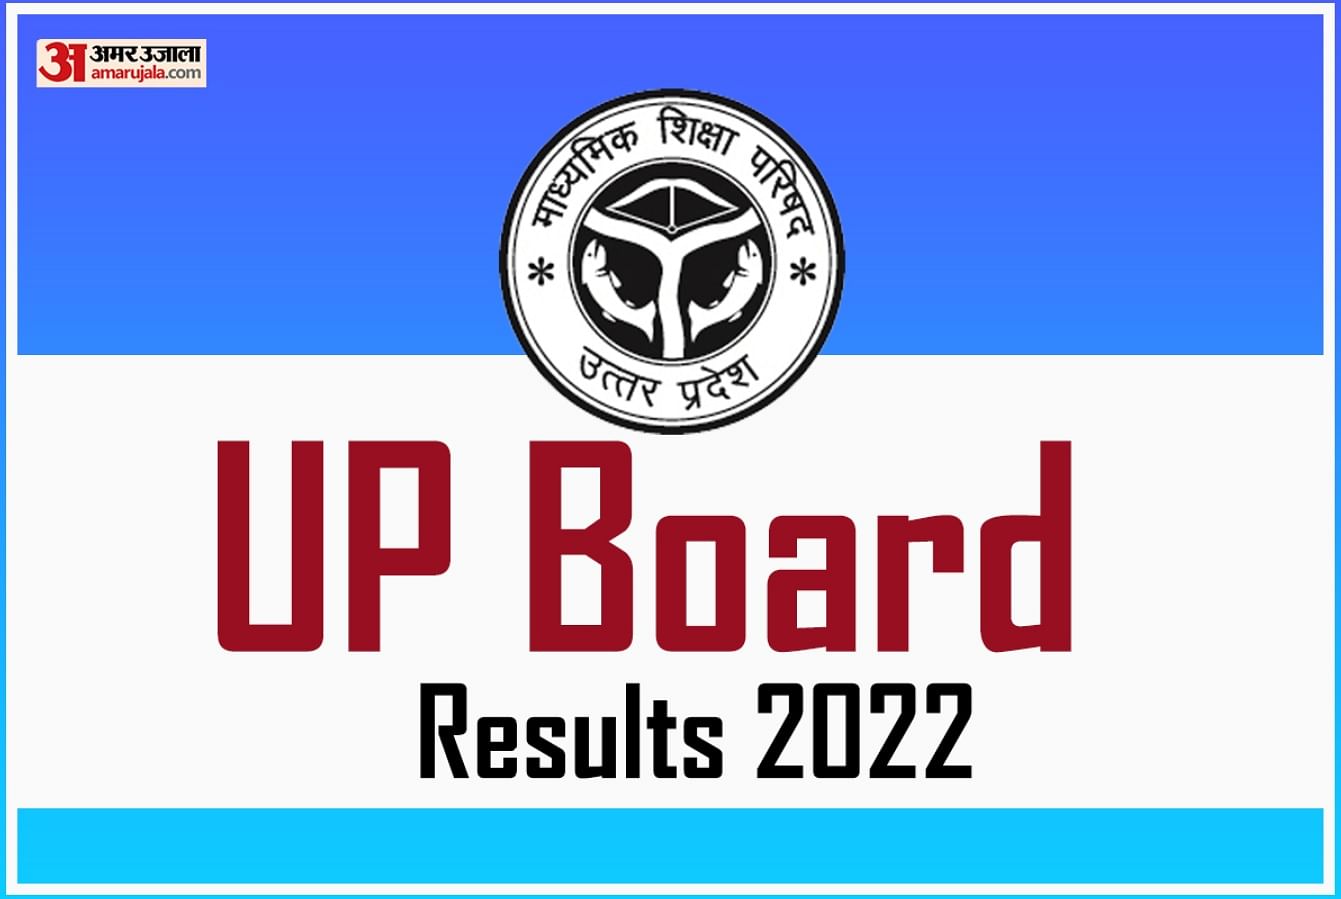 UP Board Result 2022: UPMSP Officials to Release Results Notification Today, Know How to Download Scorecard